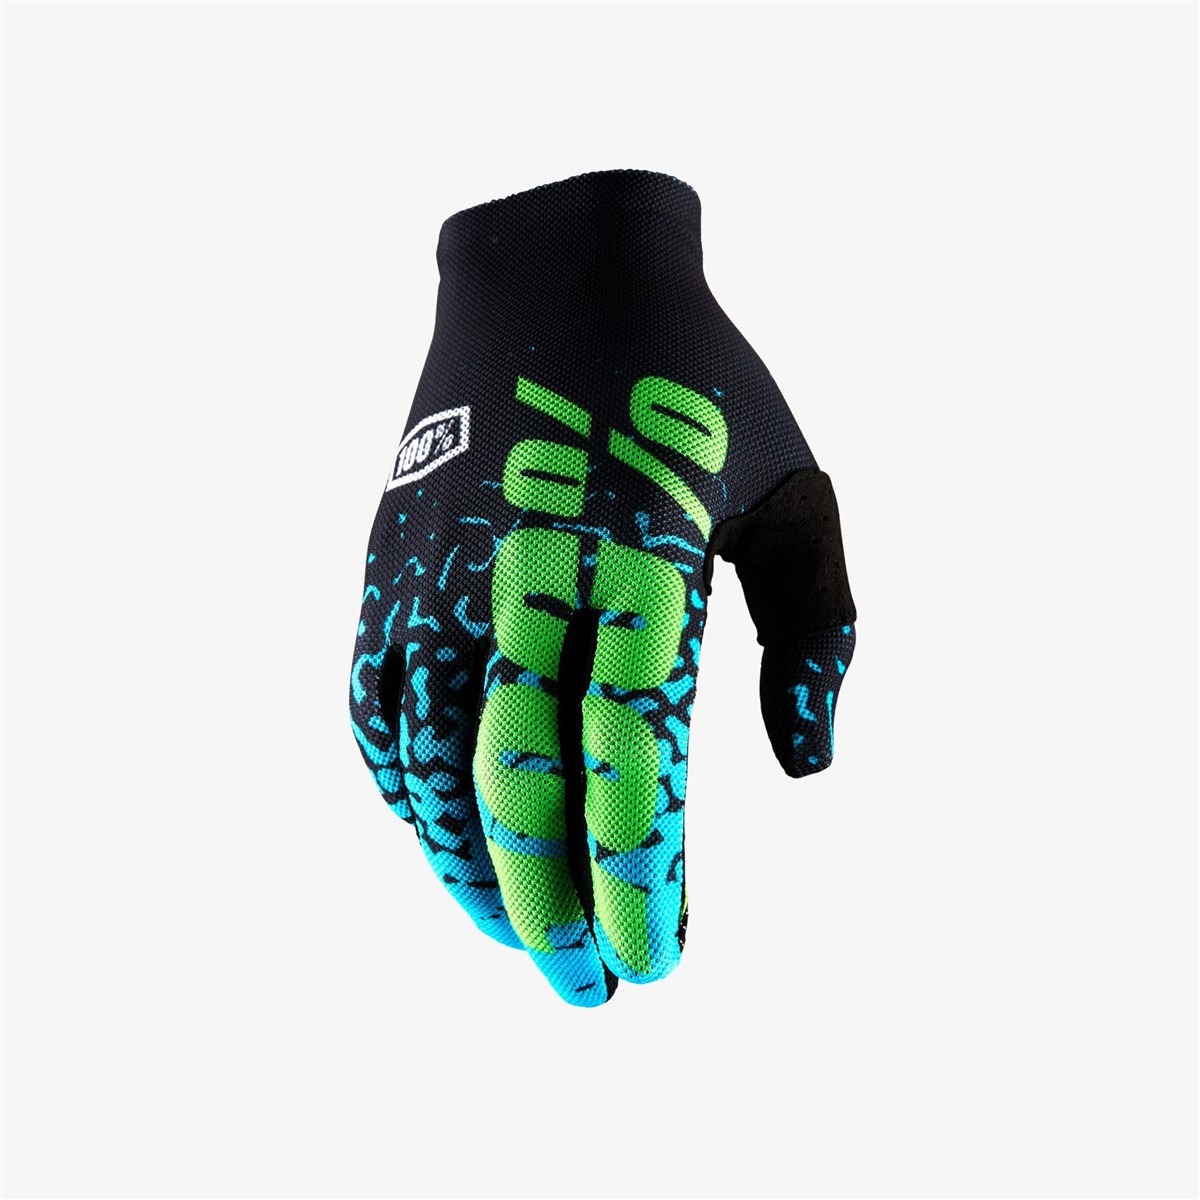 100% Celium 2 Long Finger Cycling Gloves product image